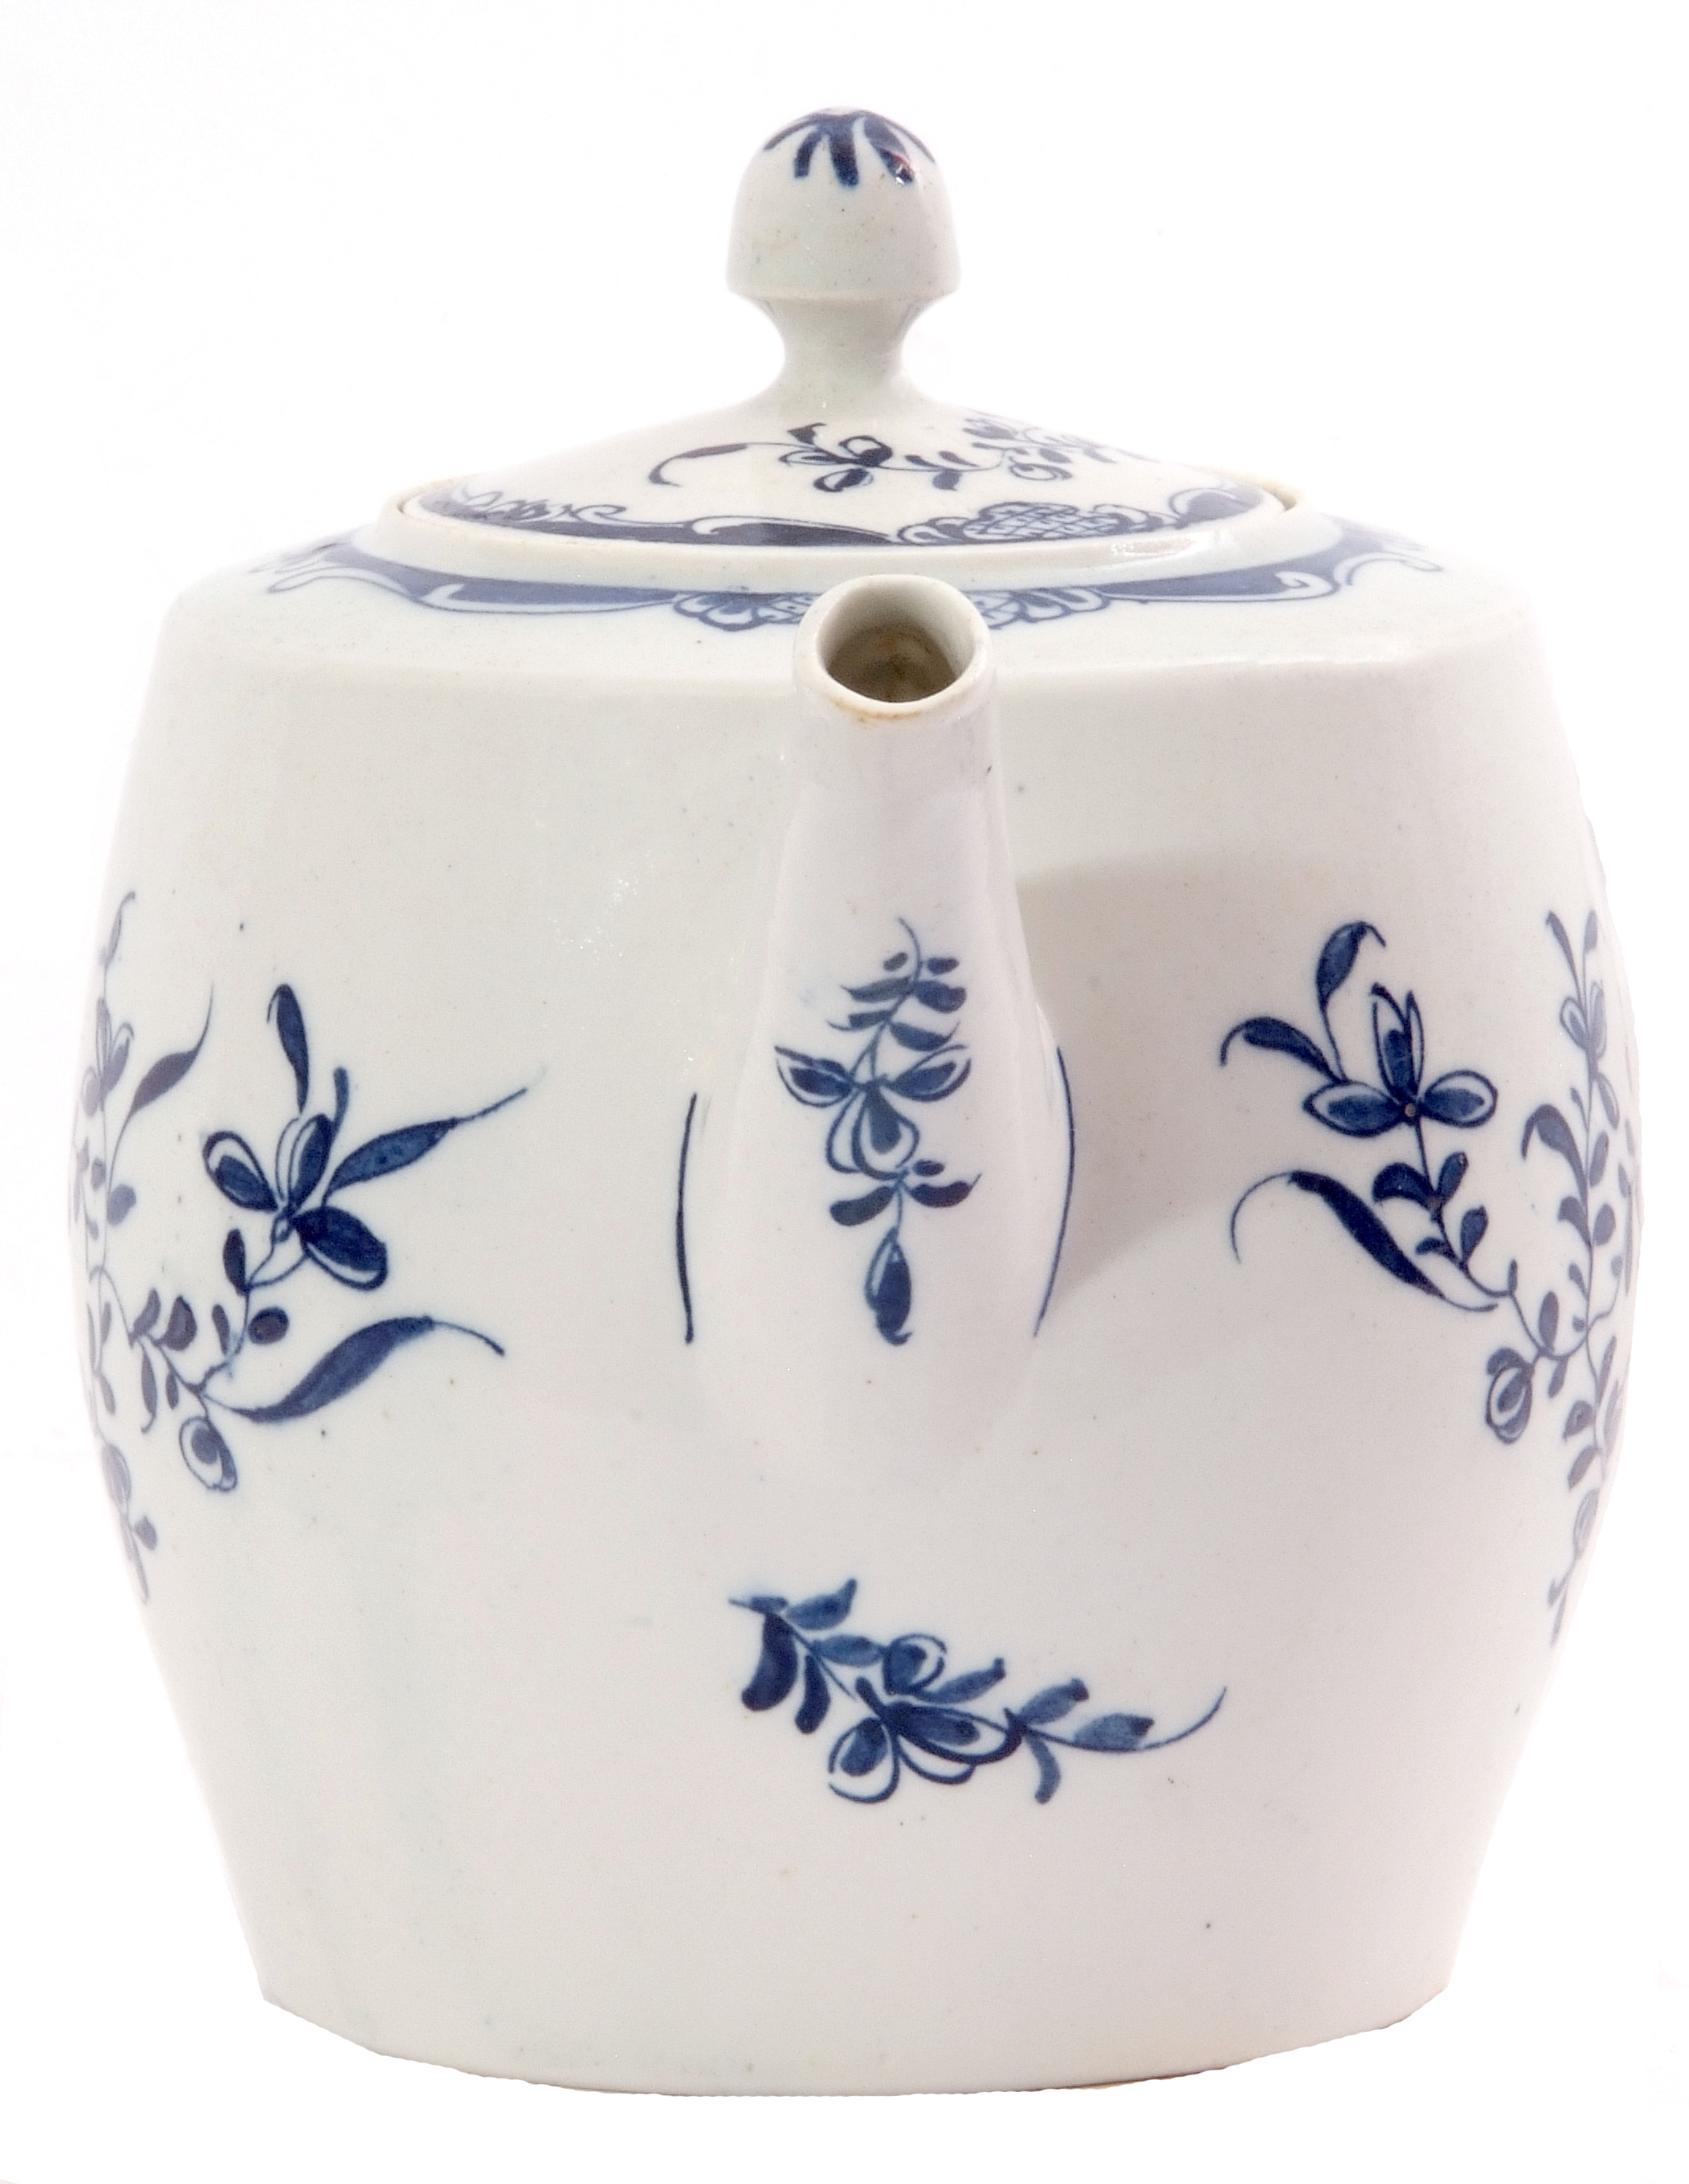 Unusual Lowestoft porcelain barrel shaped tea pot and cover, decorated with trailing flowers - Image 3 of 6